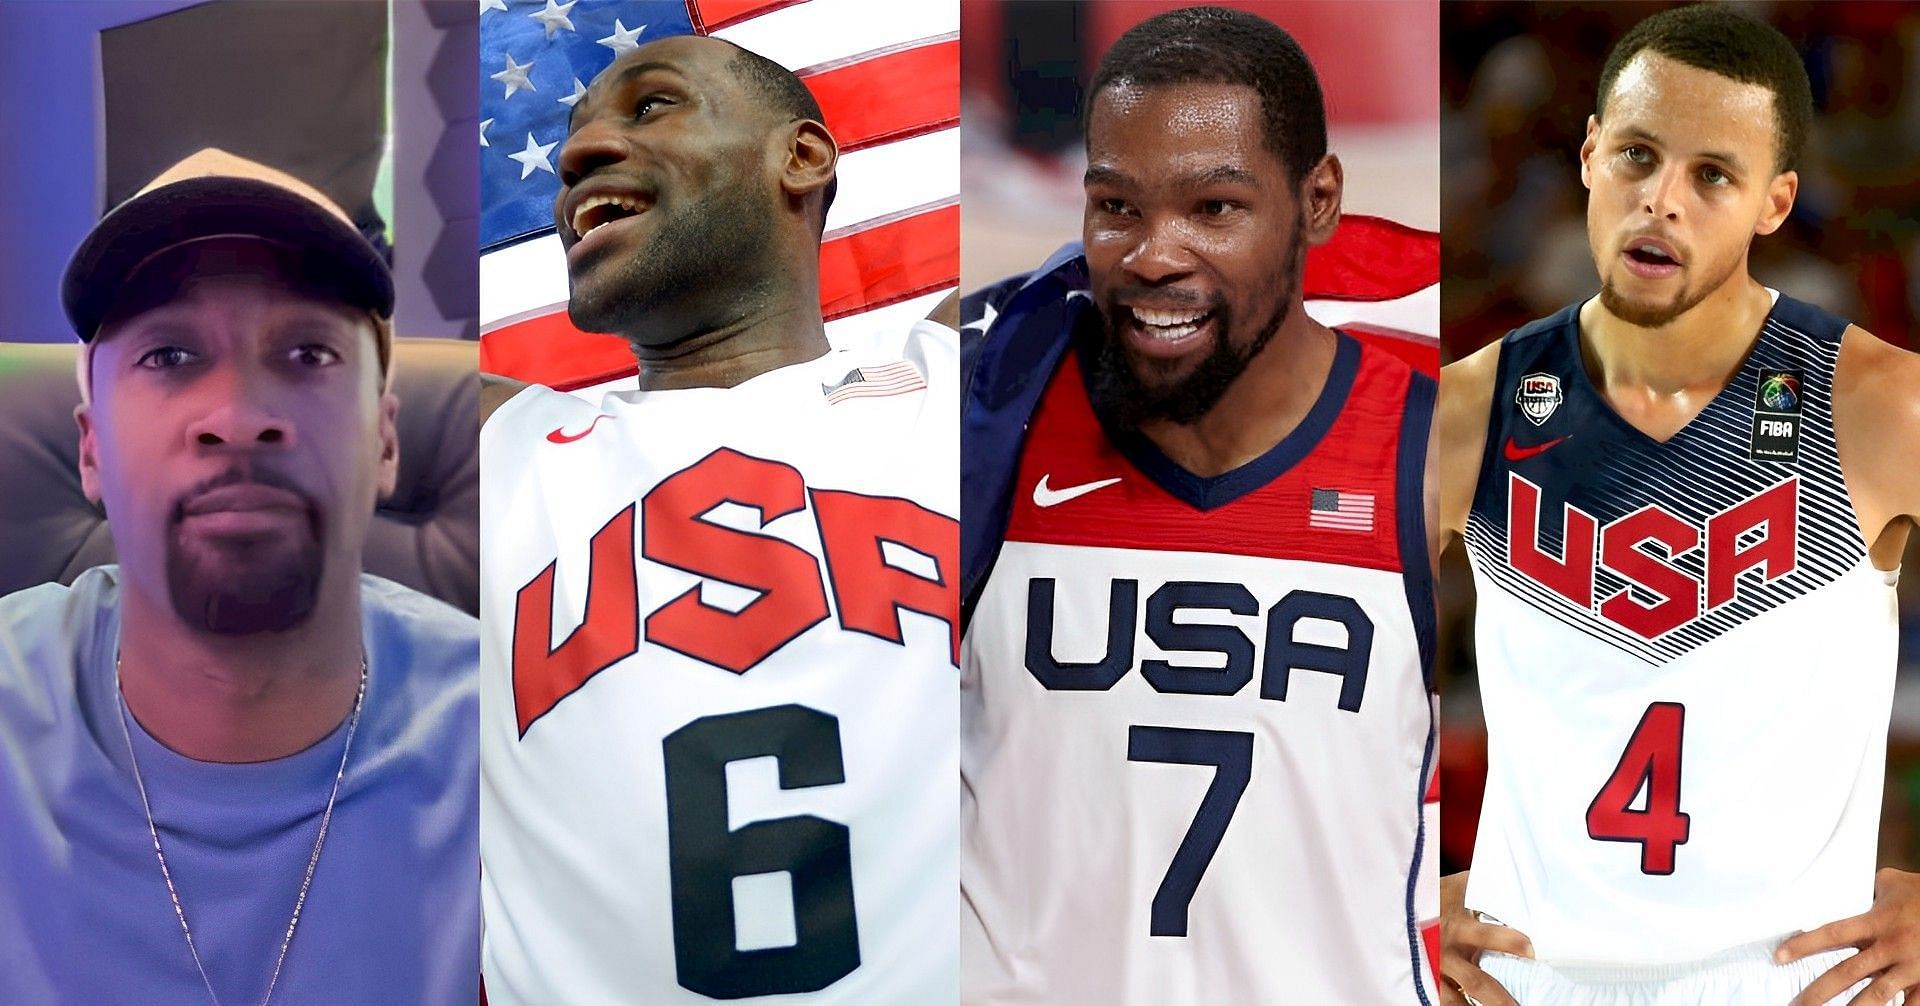 Former Washington Wizards star point guard Gilbert Arenas and NBA superstars LeBron James, Kevin Durant and Steph Curry